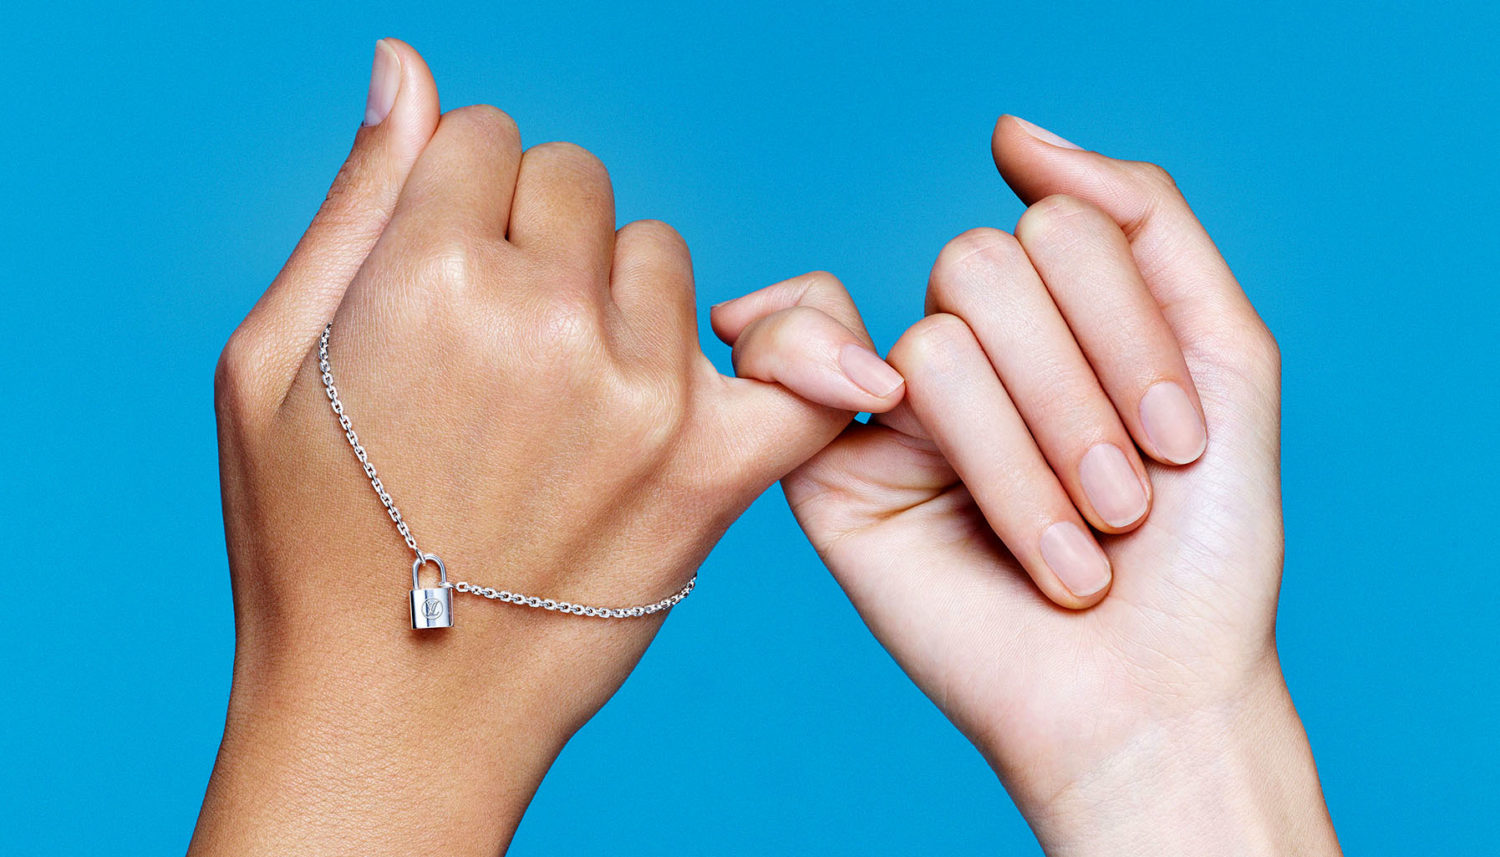 Louis Vuitton on X: More than a symbolic gesture. Every purchase of a  #LouisVuitton Silver Lockit bracelet supports @UNICEF's mission to support  millions of vulnerable children. #MAKEAPROMISE at   UNICEF does not